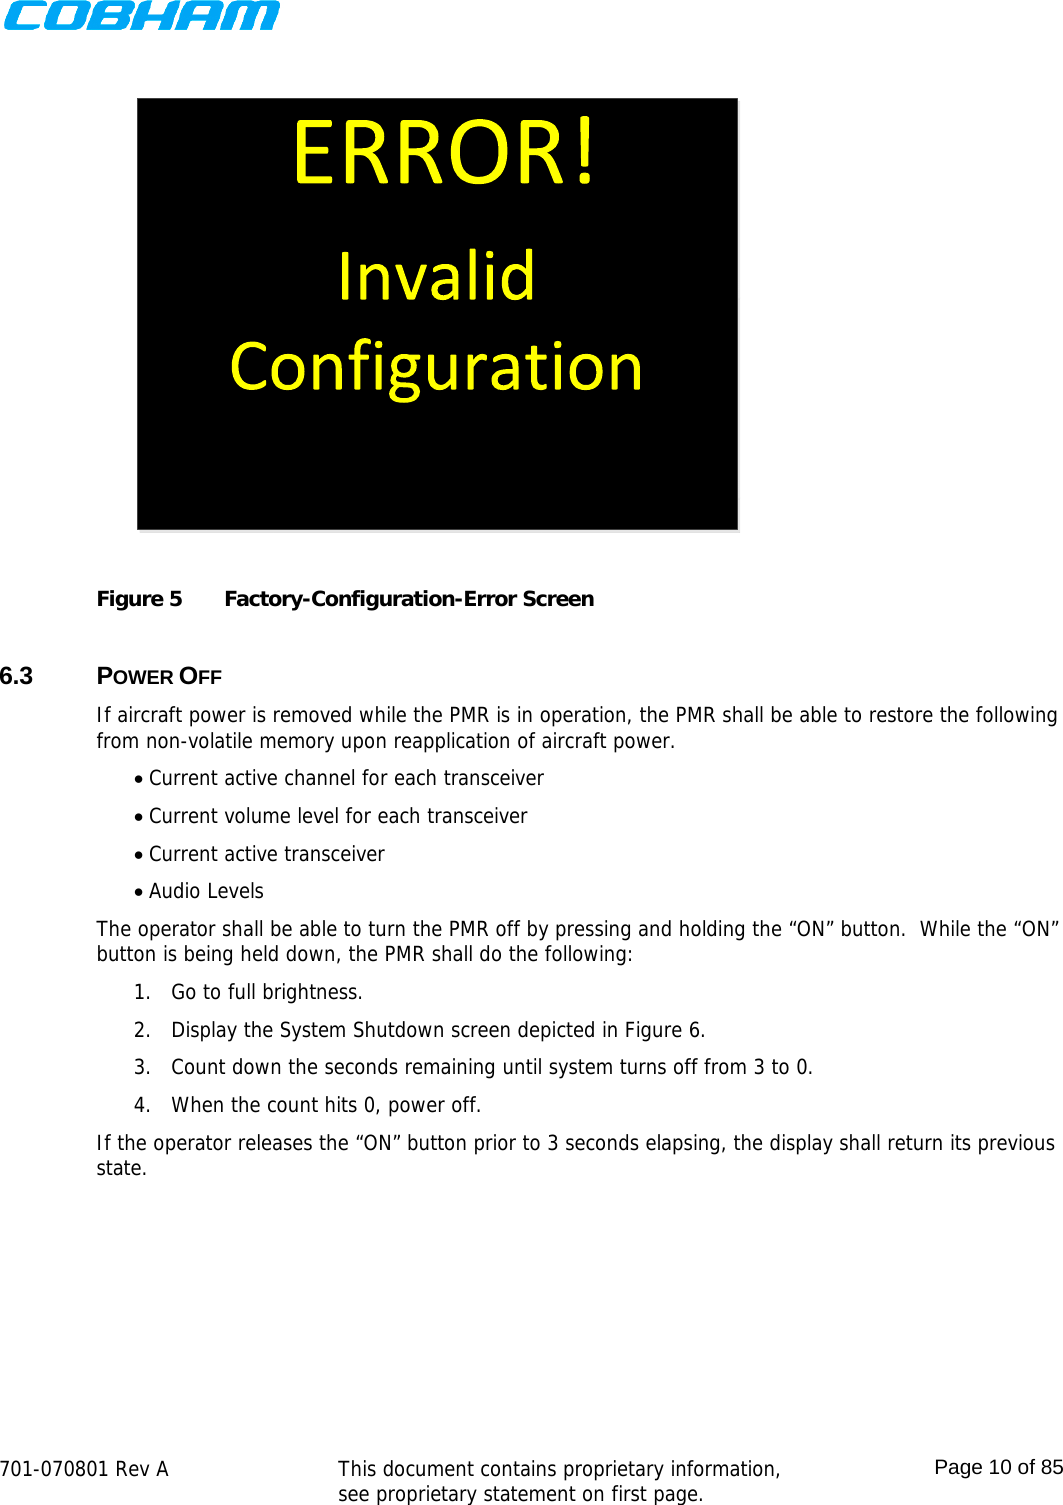    701-070801 Rev A   This document contains proprietary information, see proprietary statement on first page.  Page 10 of 85   Figure 5  Factory-Configuration-Error Screen  6.3 POWER OFF If aircraft power is removed while the PMR is in operation, the PMR shall be able to restore the following from non-volatile memory upon reapplication of aircraft power.  Current active channel for each transceiver  Current volume level for each transceiver  Current active transceiver  Audio Levels The operator shall be able to turn the PMR off by pressing and holding the “ON” button.  While the “ON” button is being held down, the PMR shall do the following: 1. Go to full brightness. 2. Display the System Shutdown screen depicted in Figure 6. 3. Count down the seconds remaining until system turns off from 3 to 0. 4. When the count hits 0, power off. If the operator releases the “ON” button prior to 3 seconds elapsing, the display shall return its previous state. 